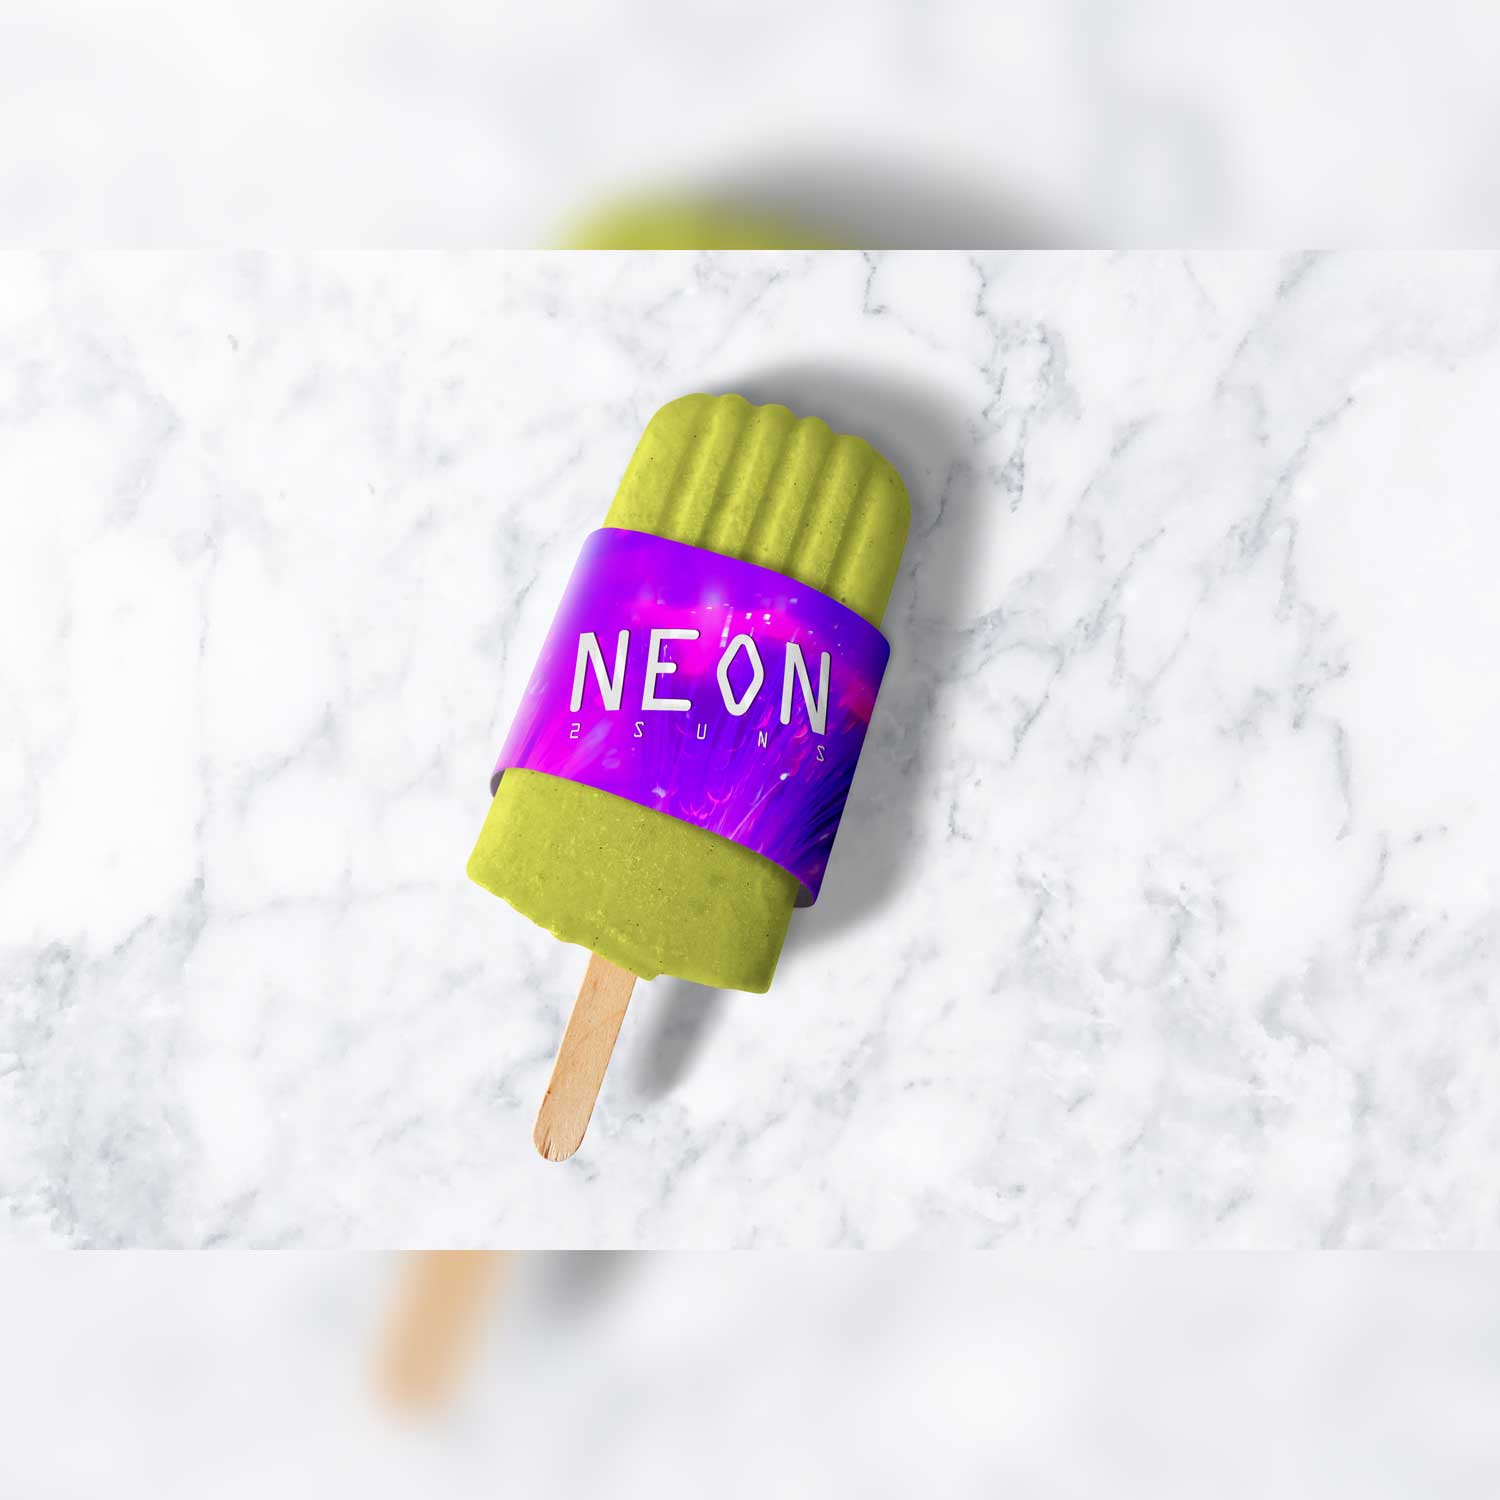 Neon Holographic Digital Background Overlay Popsicle Pack Print Example.